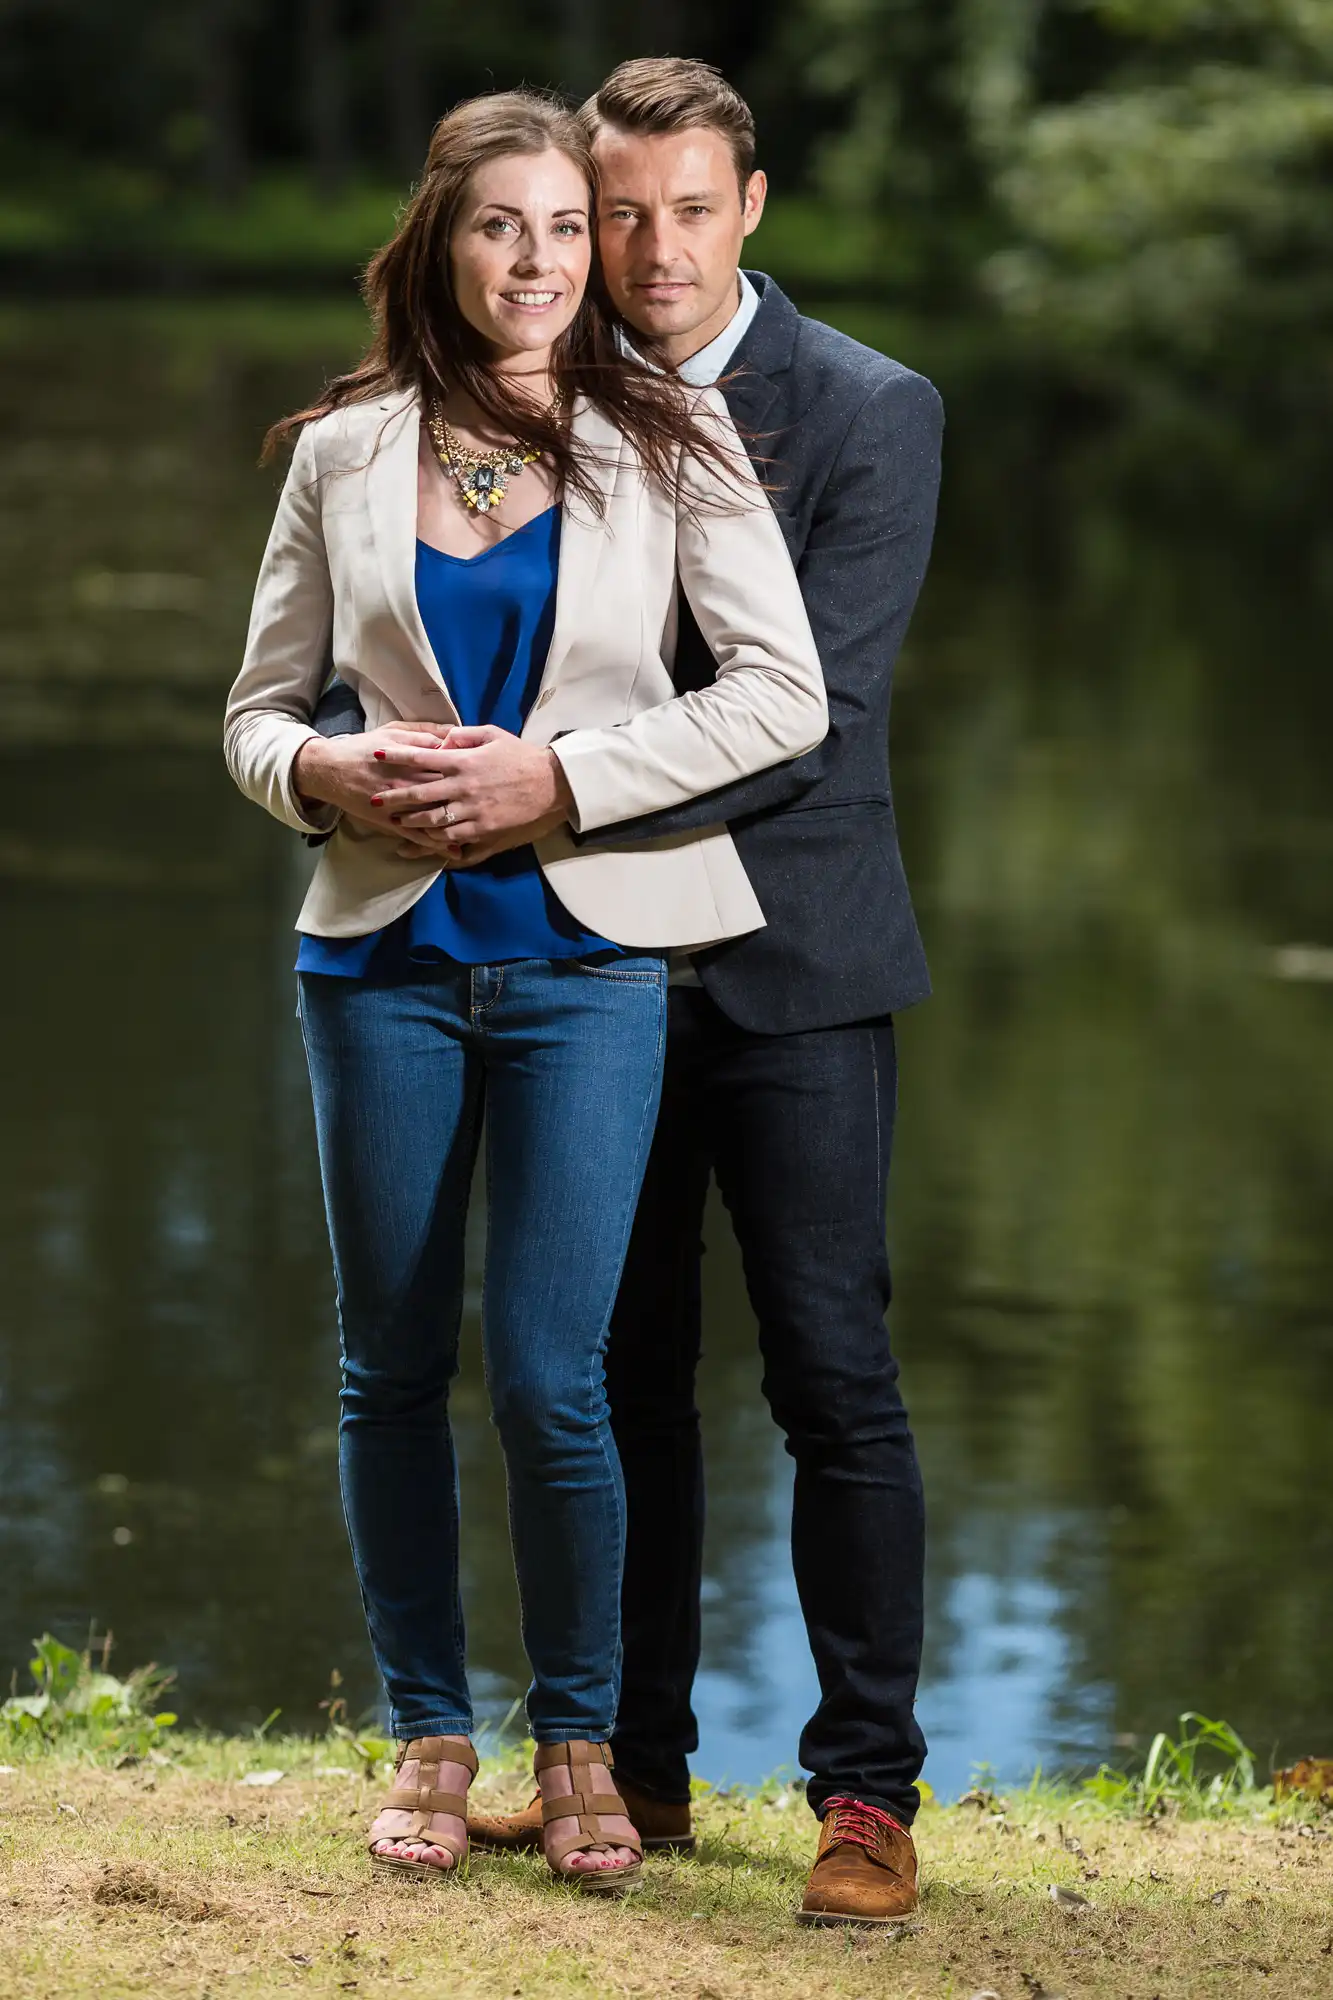 A couple standing by a lake, the woman wearing a white blazer and jeans, the man in a gray shirt and jeans, both smiling at the camera.